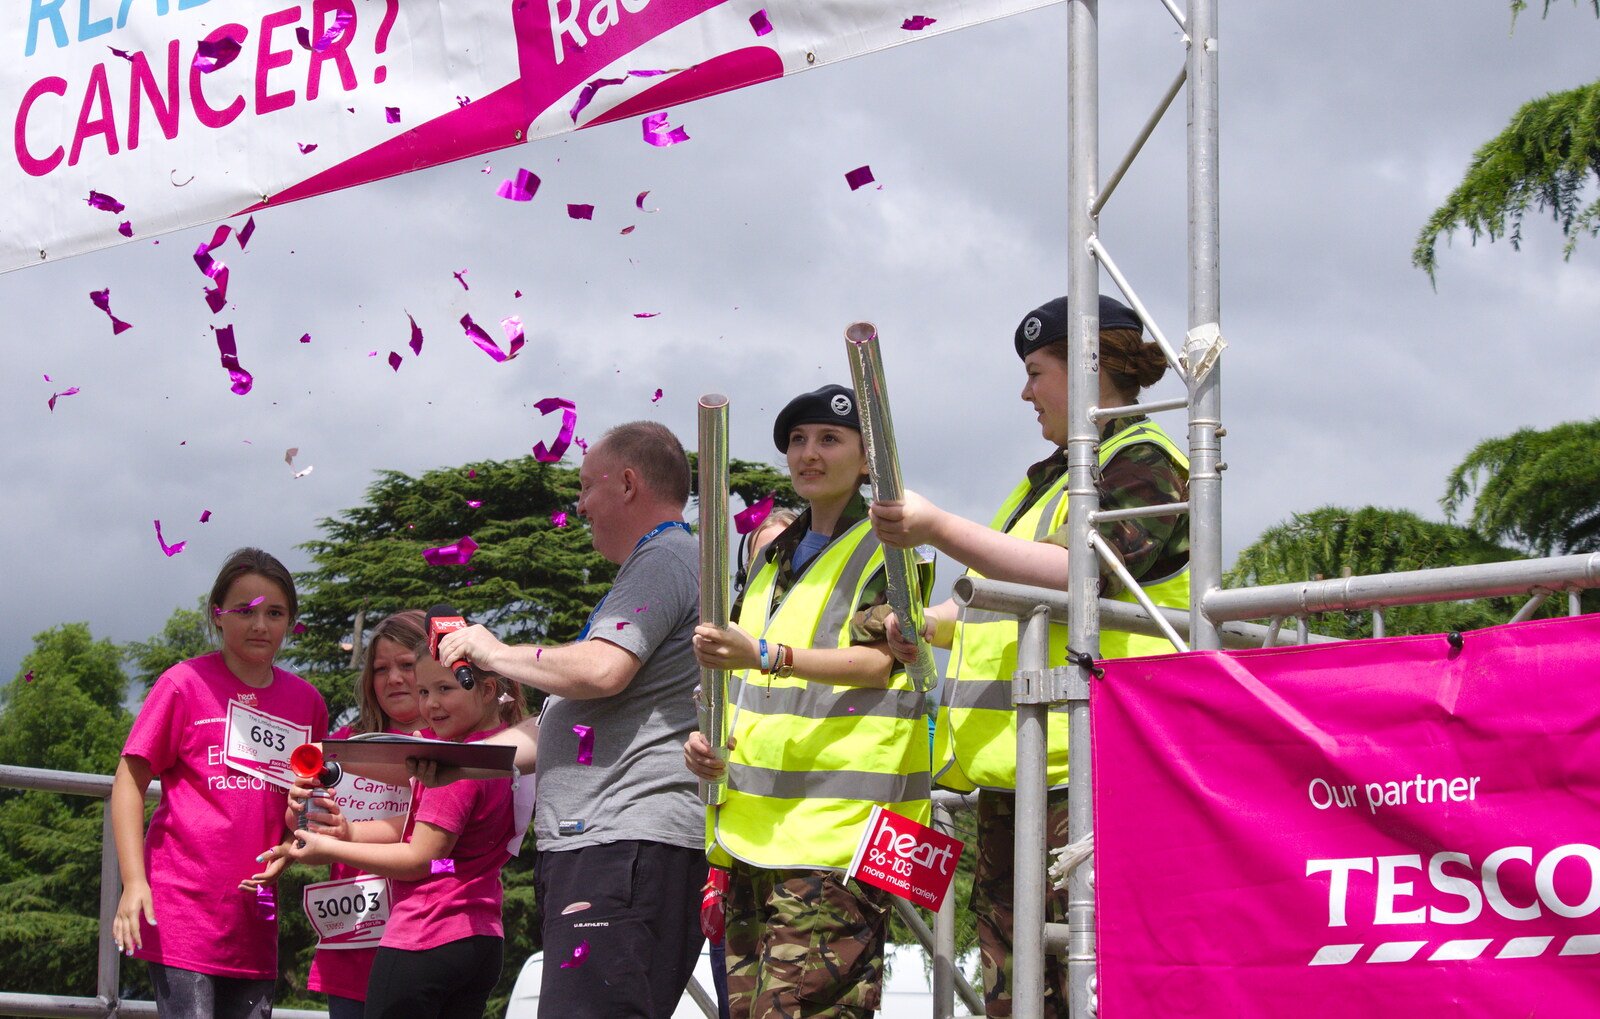 The Air Cadets set off some party-poppers from Isobel's Race For Life, Chantry Park, Ipswich - 11th June 2014